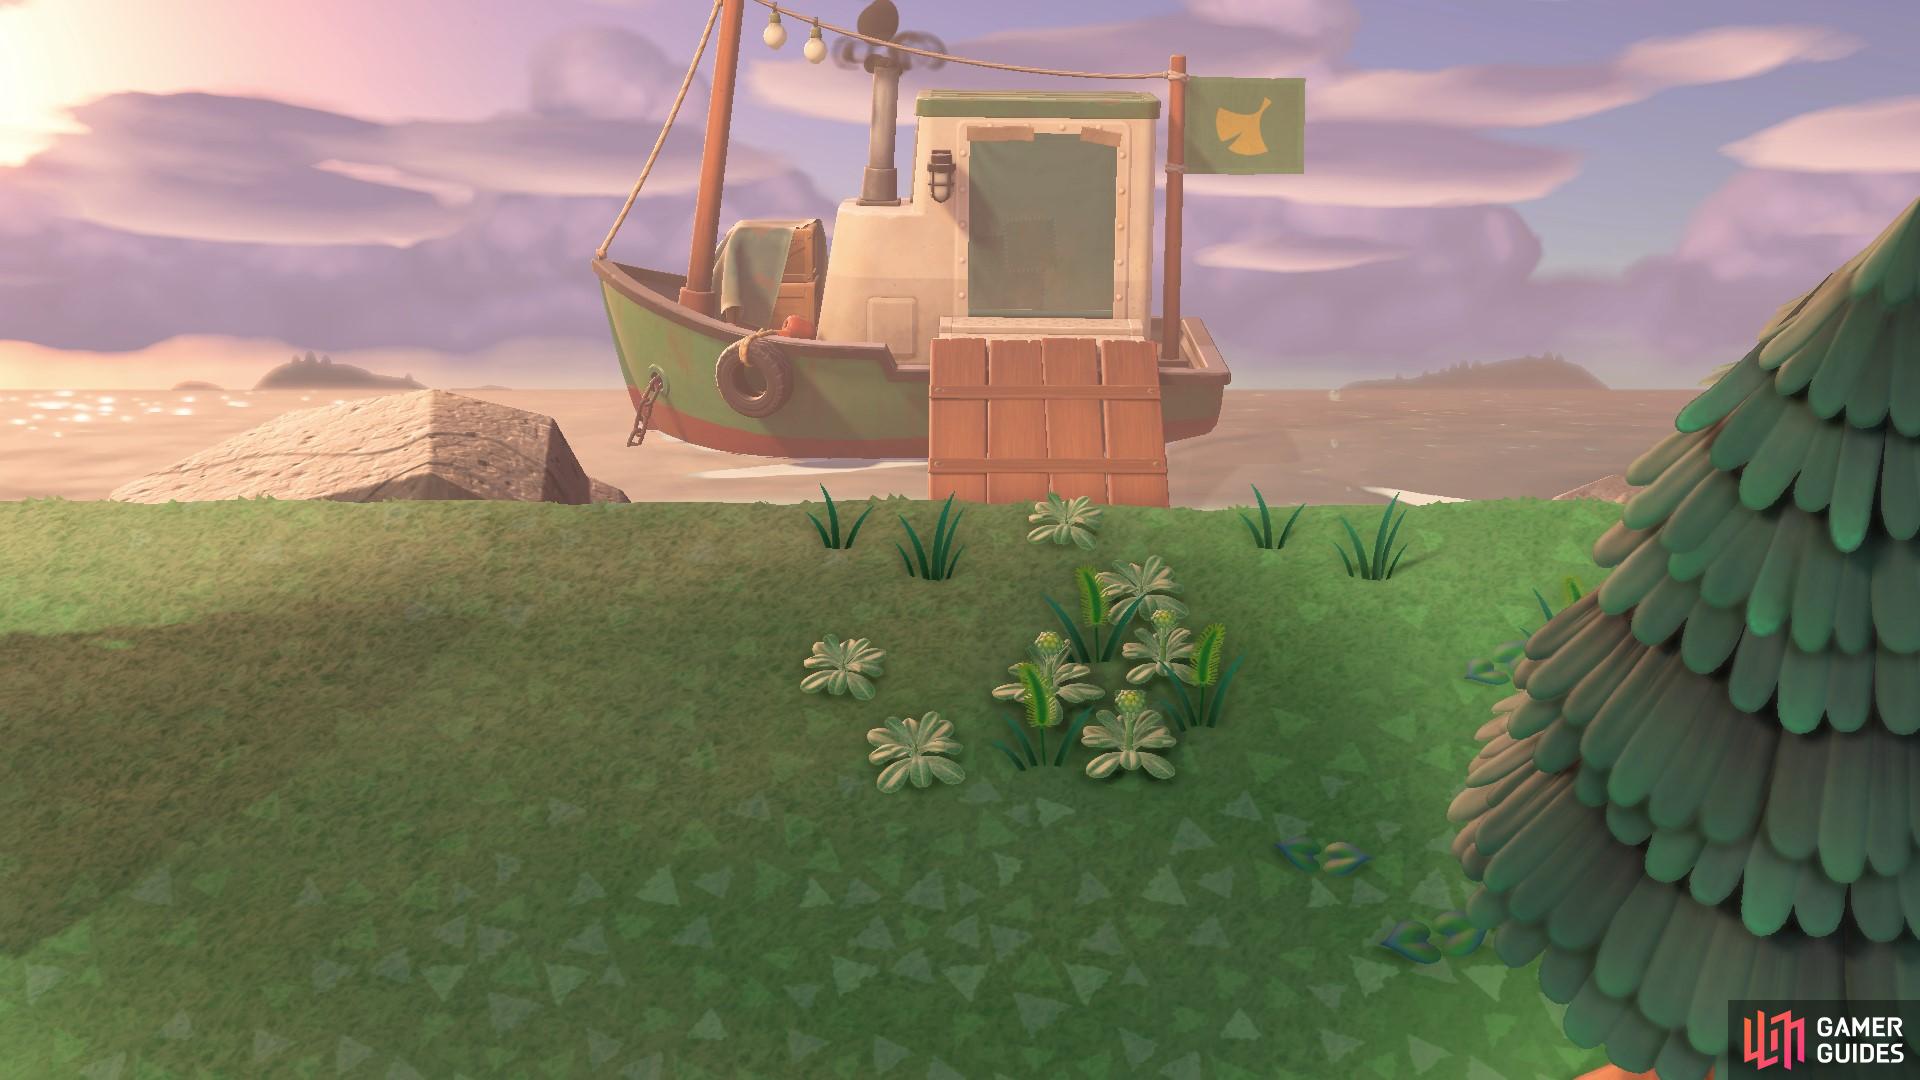 Keep an eye out for Redd’s dodgy boat docked up on your island’s secret beach.